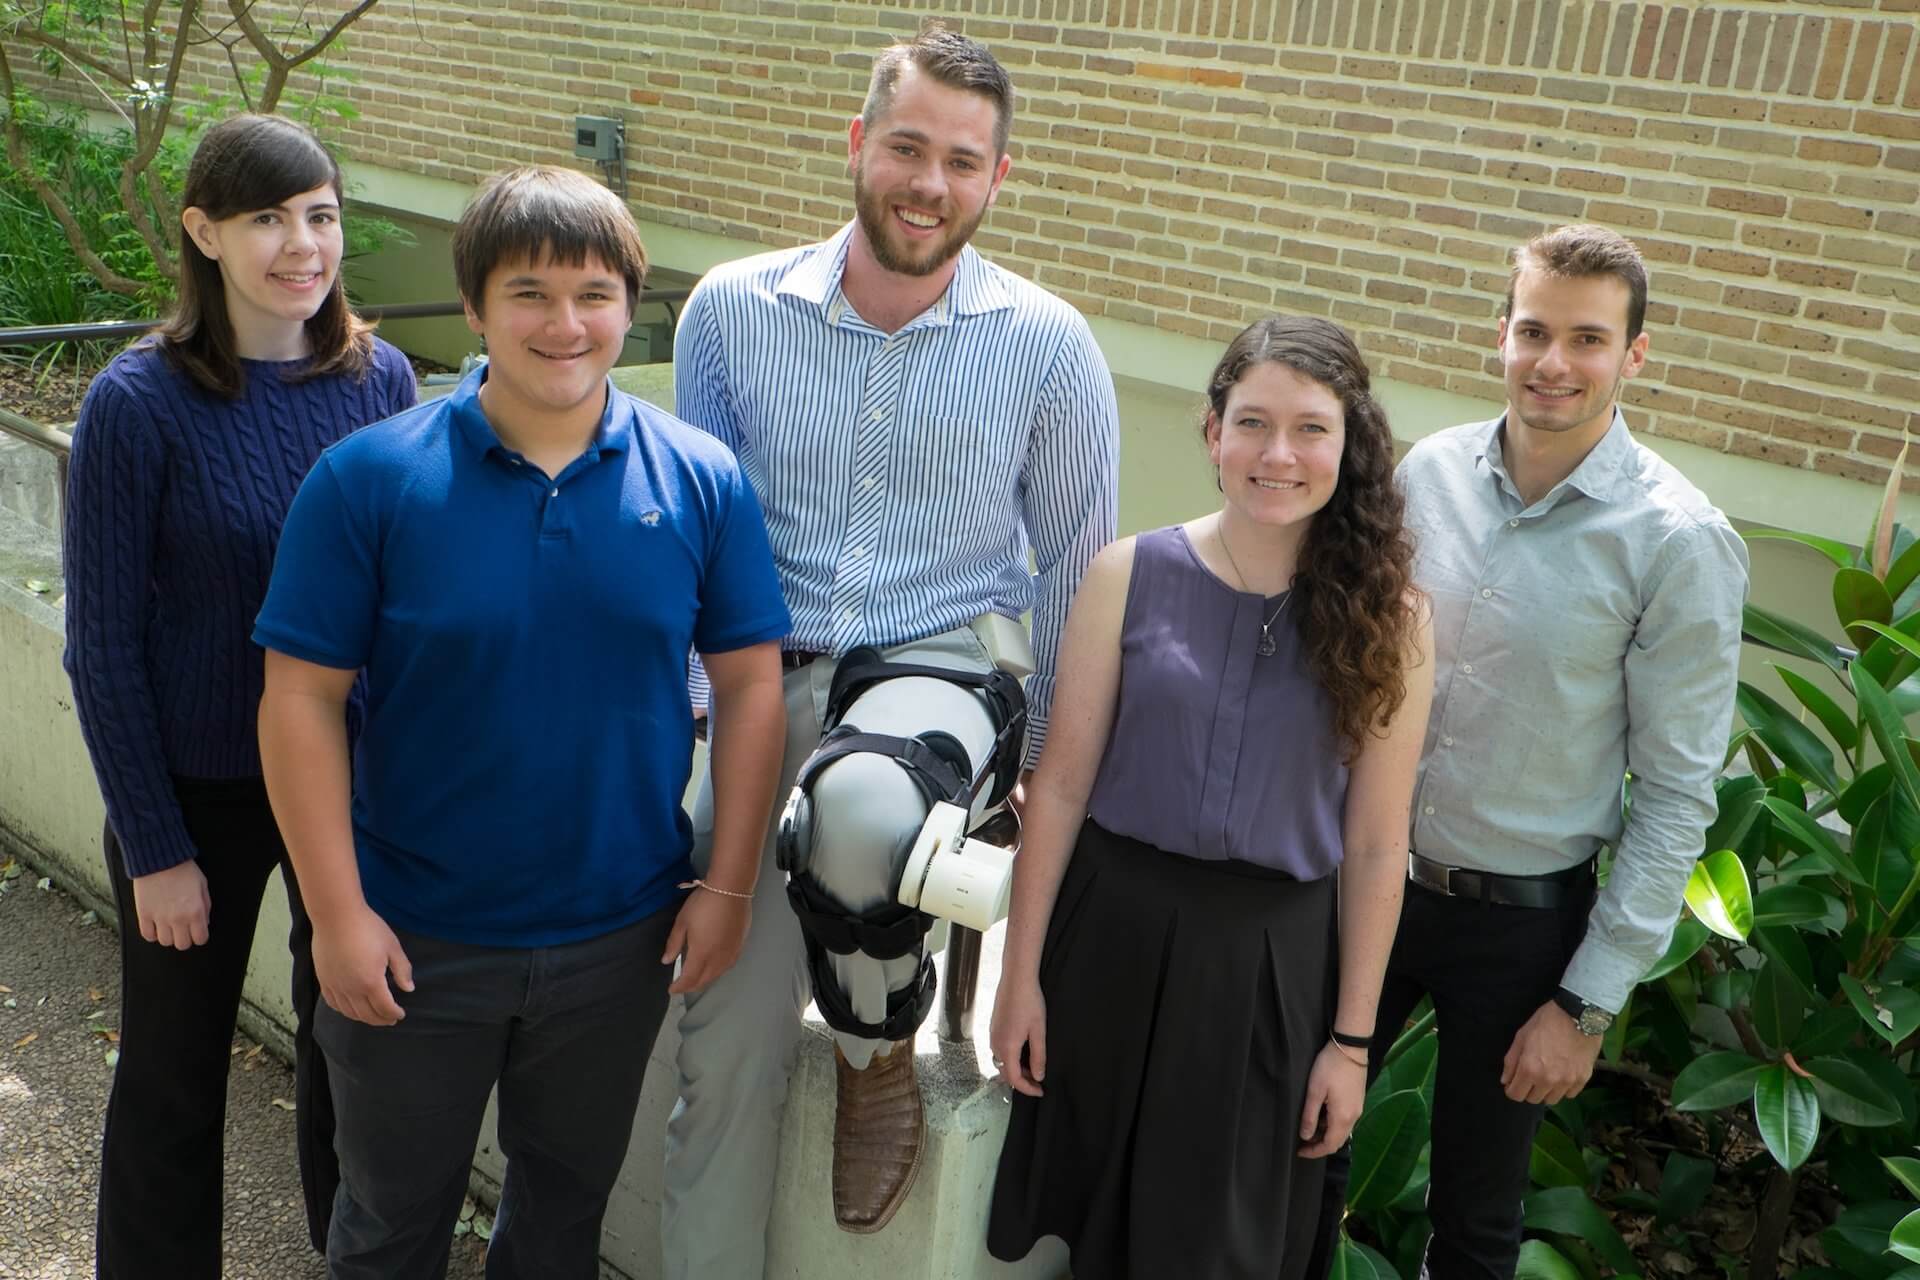 The Farmers team of Rice University engineering students, from left: Taylor Vaughn, Sean LaBaw, Chase Gensheimer, Hutson Chilton and Adrian Bizzaro. (Credit: Jeff Fitlow/Rice University)